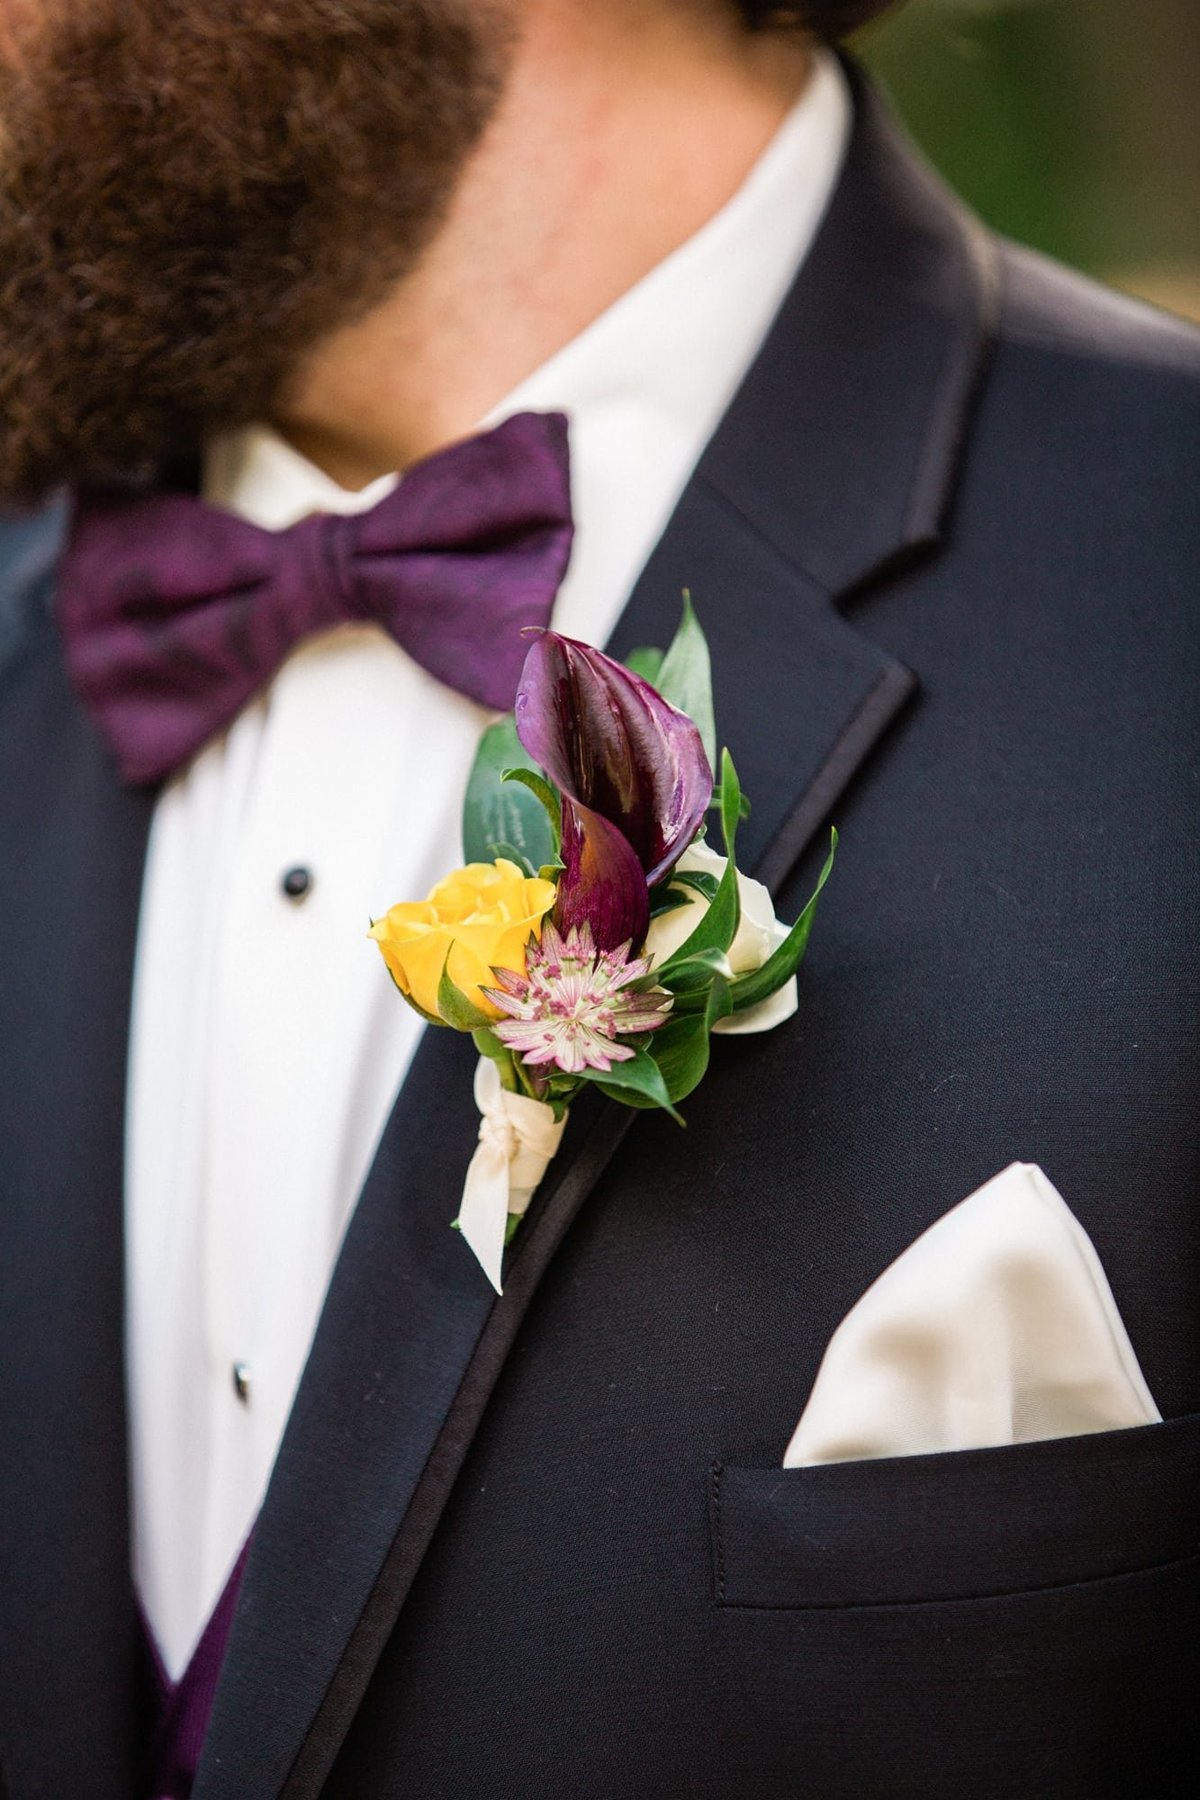 Groom's boutonniere on his lapel before the wedding ceremony